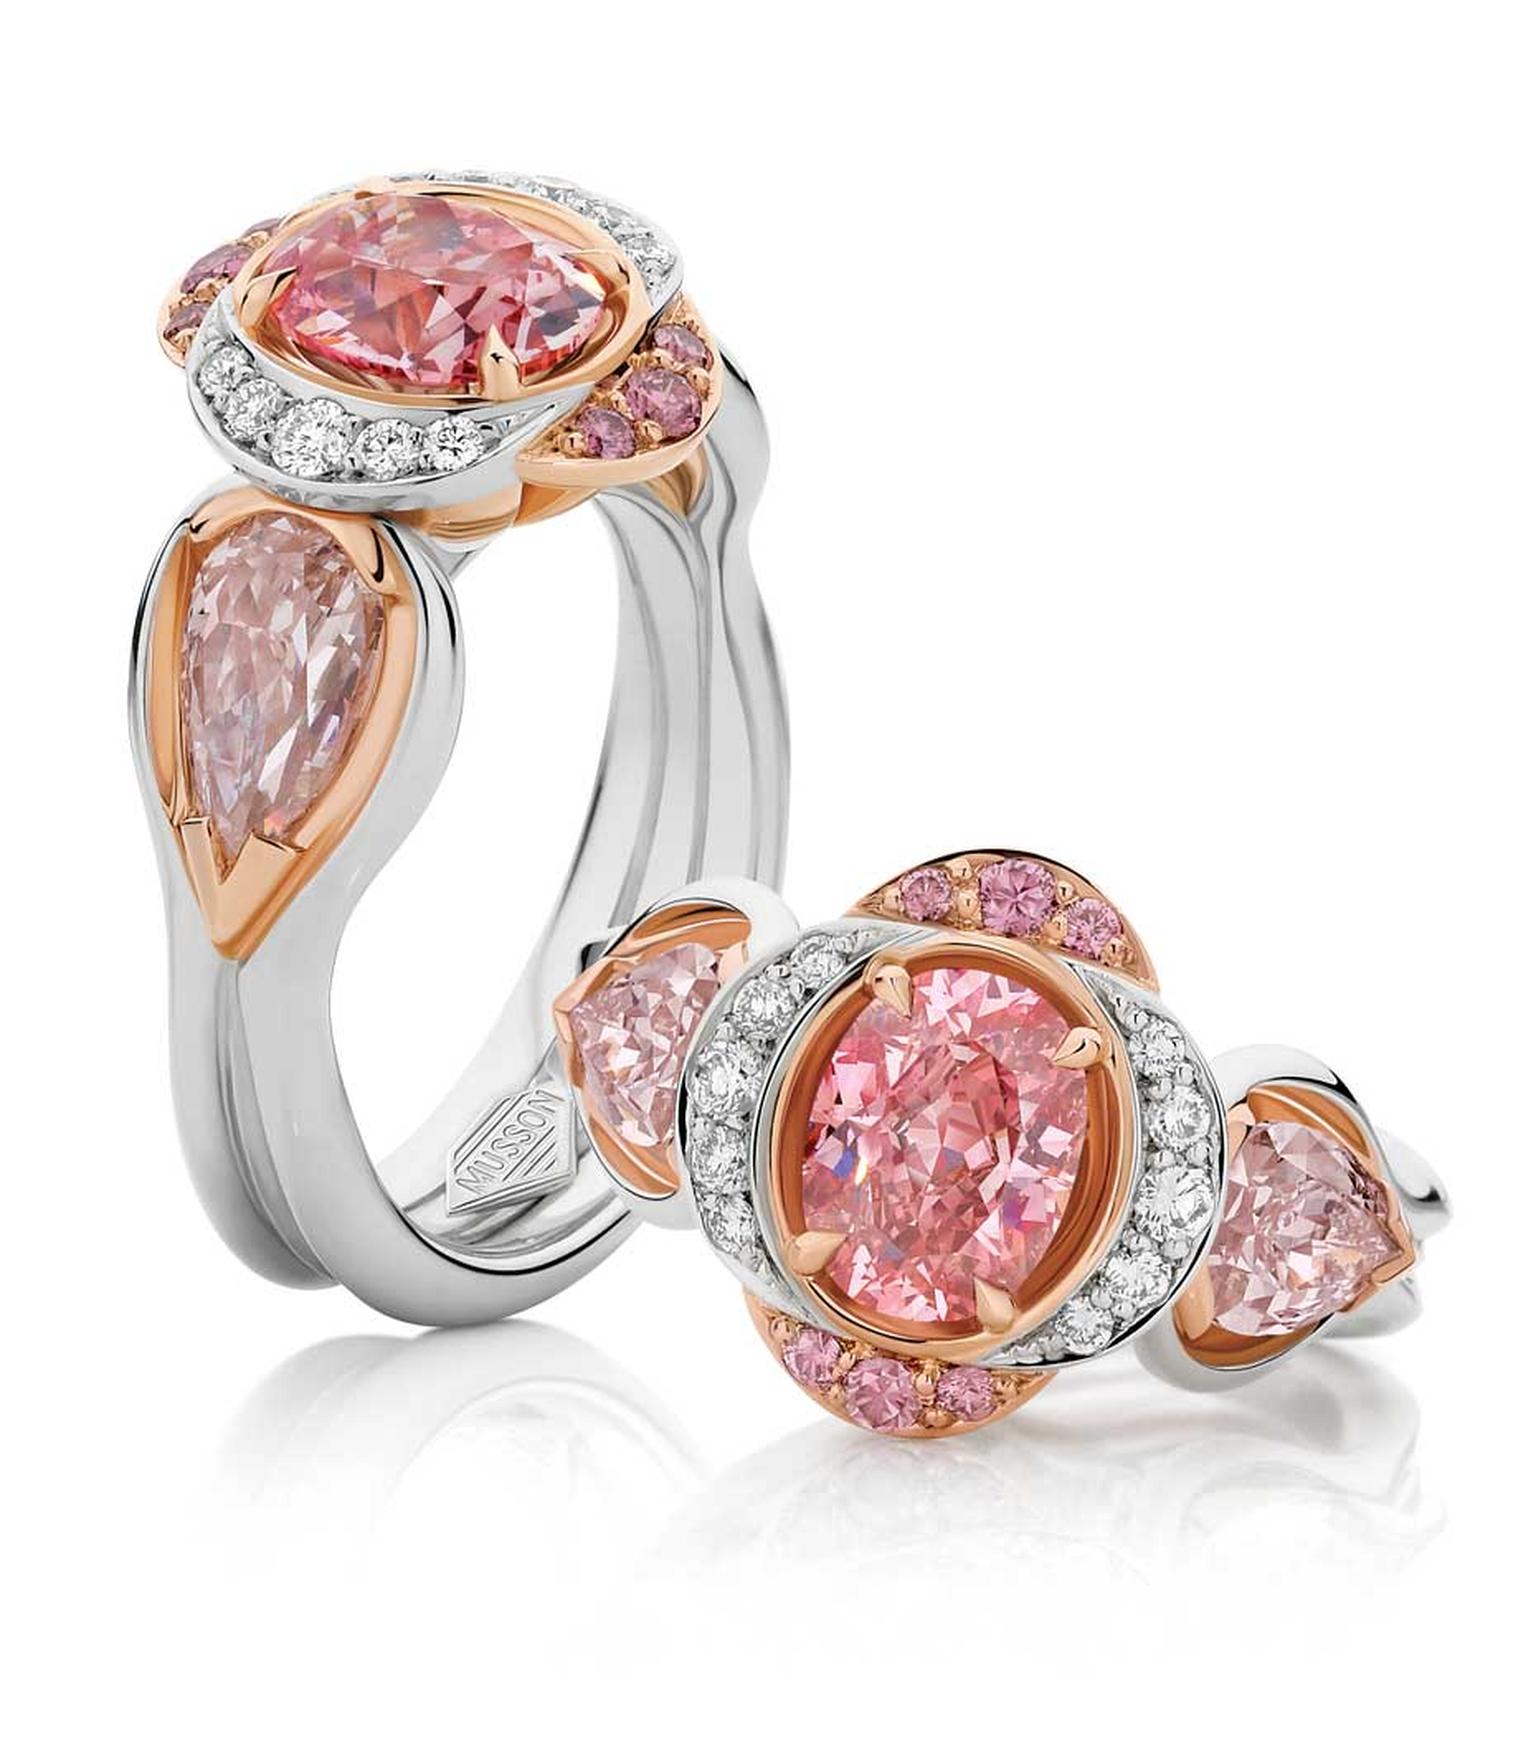 Argyle pink diamonds: the radiant, romantic and rare gems from Western Australia